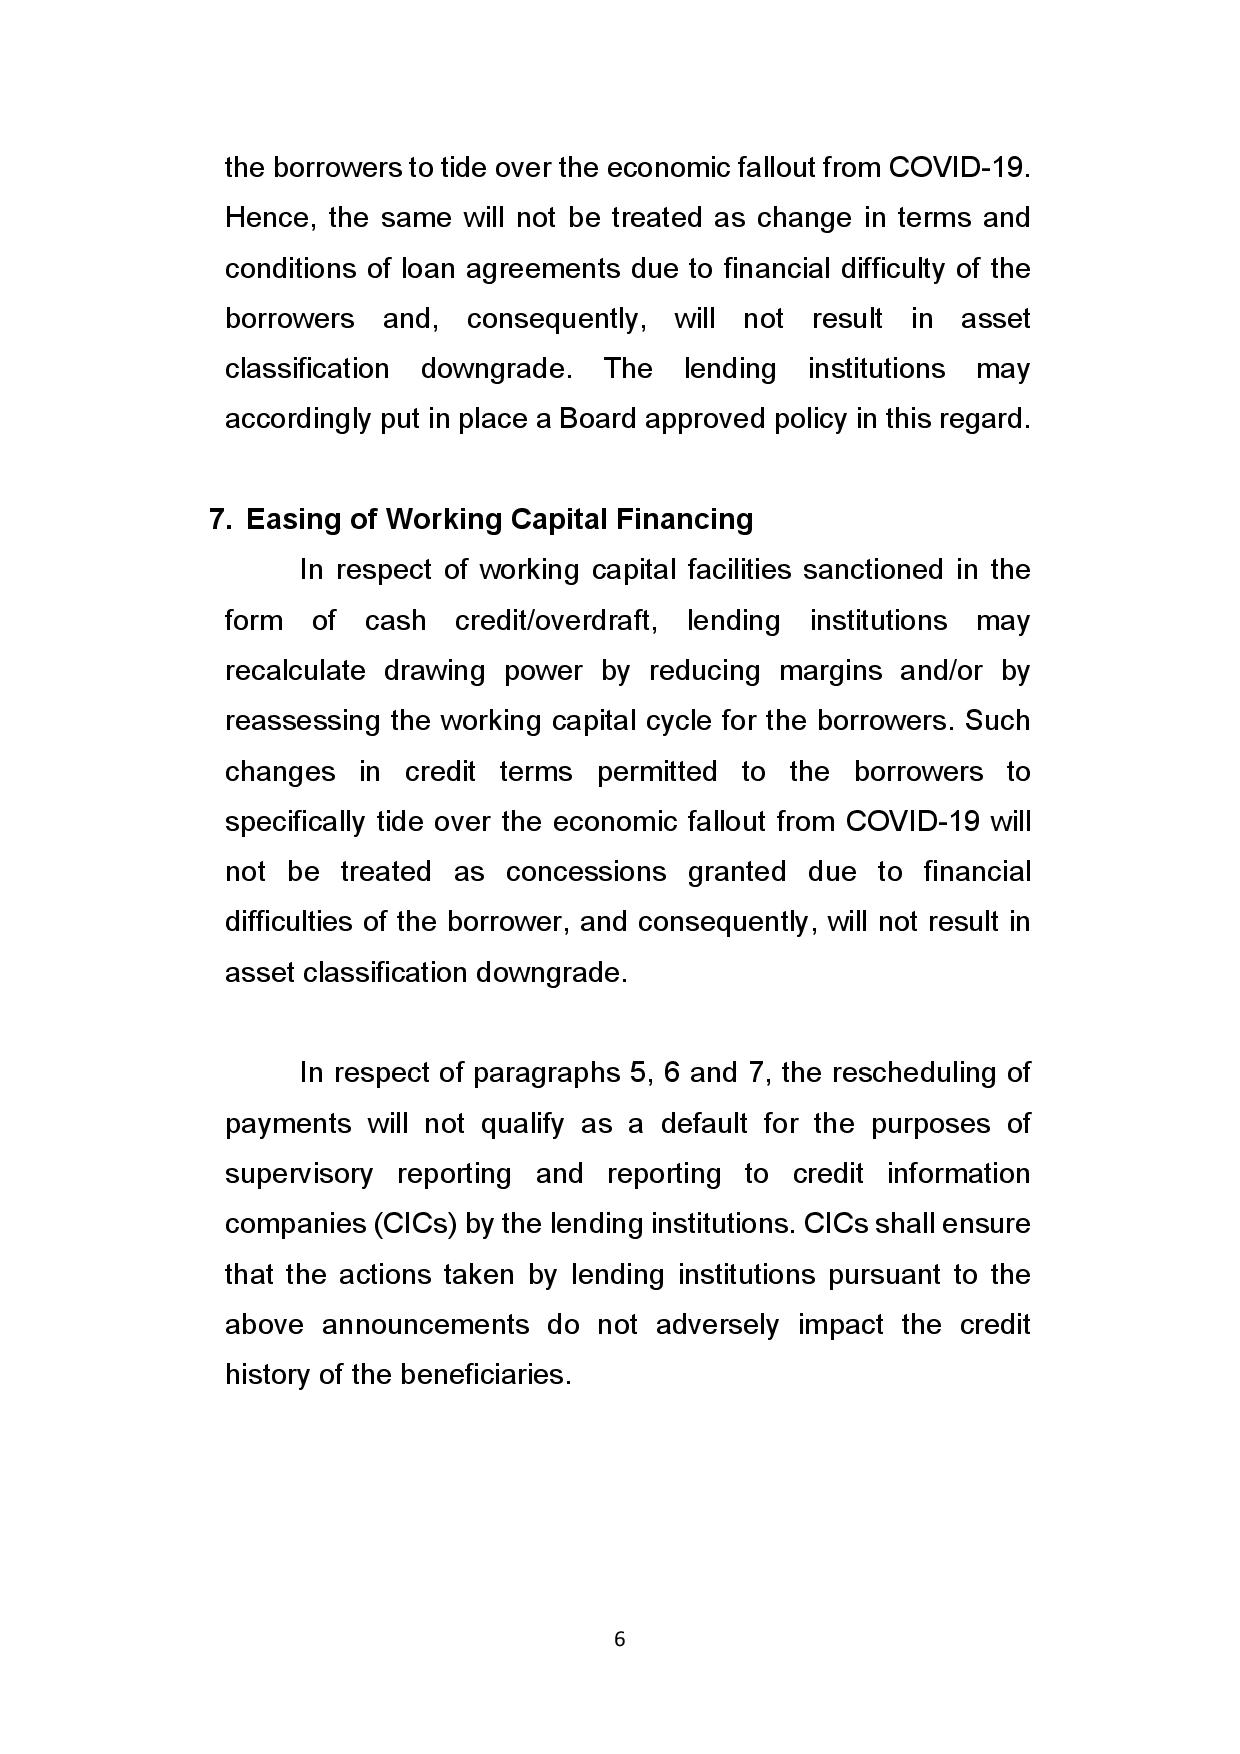 RBI MEASURES - COVID 19-page-006